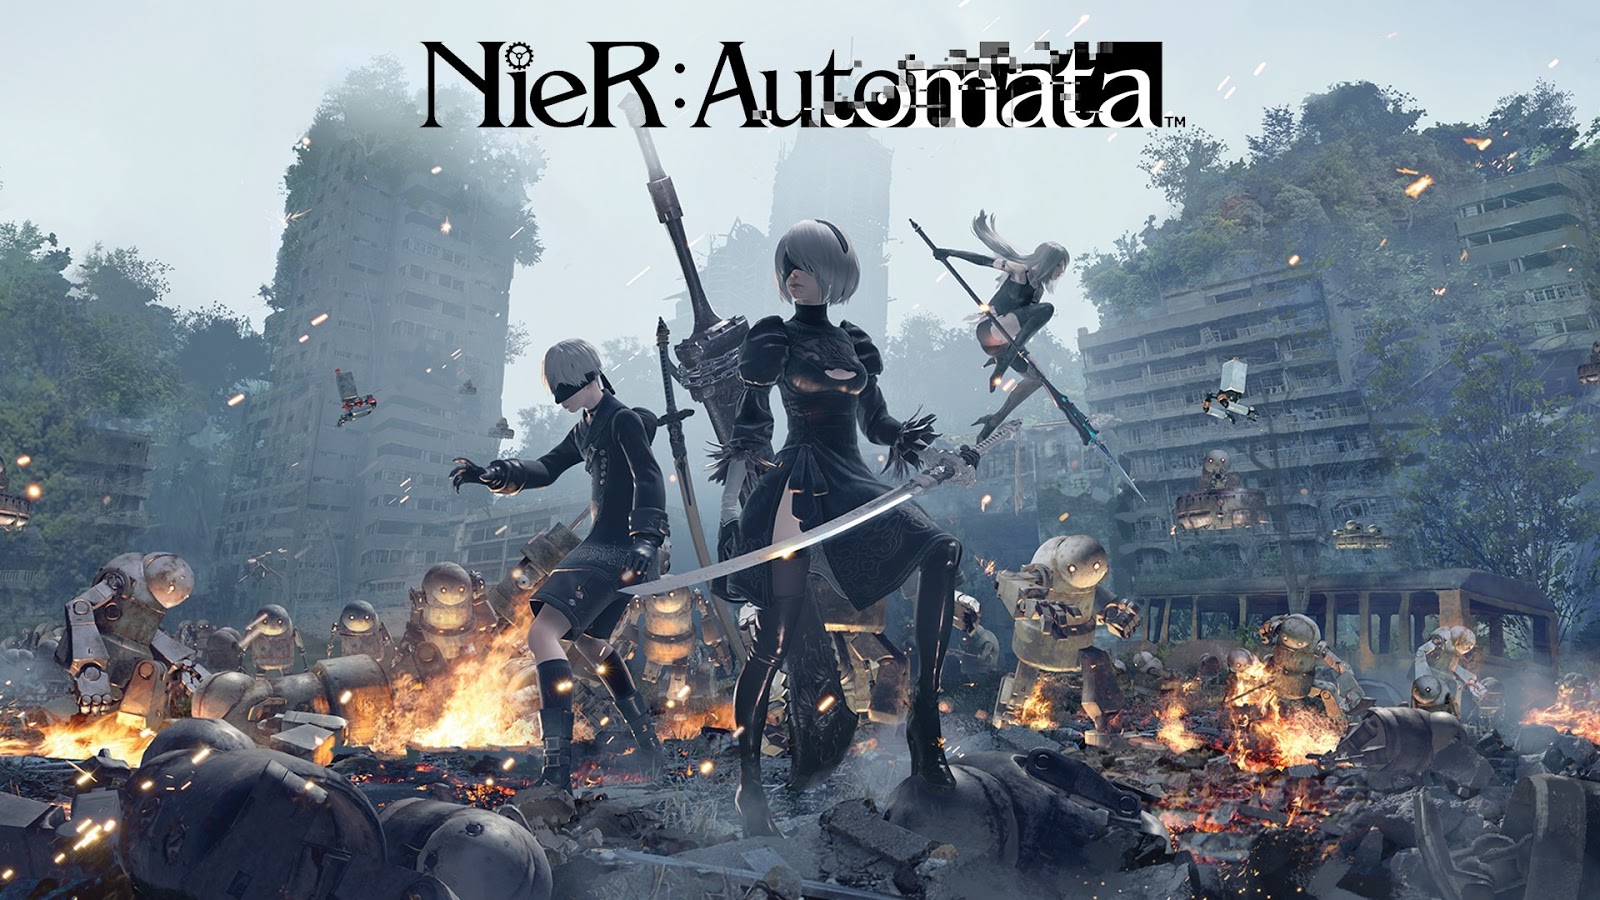 NieR: Automata PC Game Free Download Torrent - SaltyTelevision